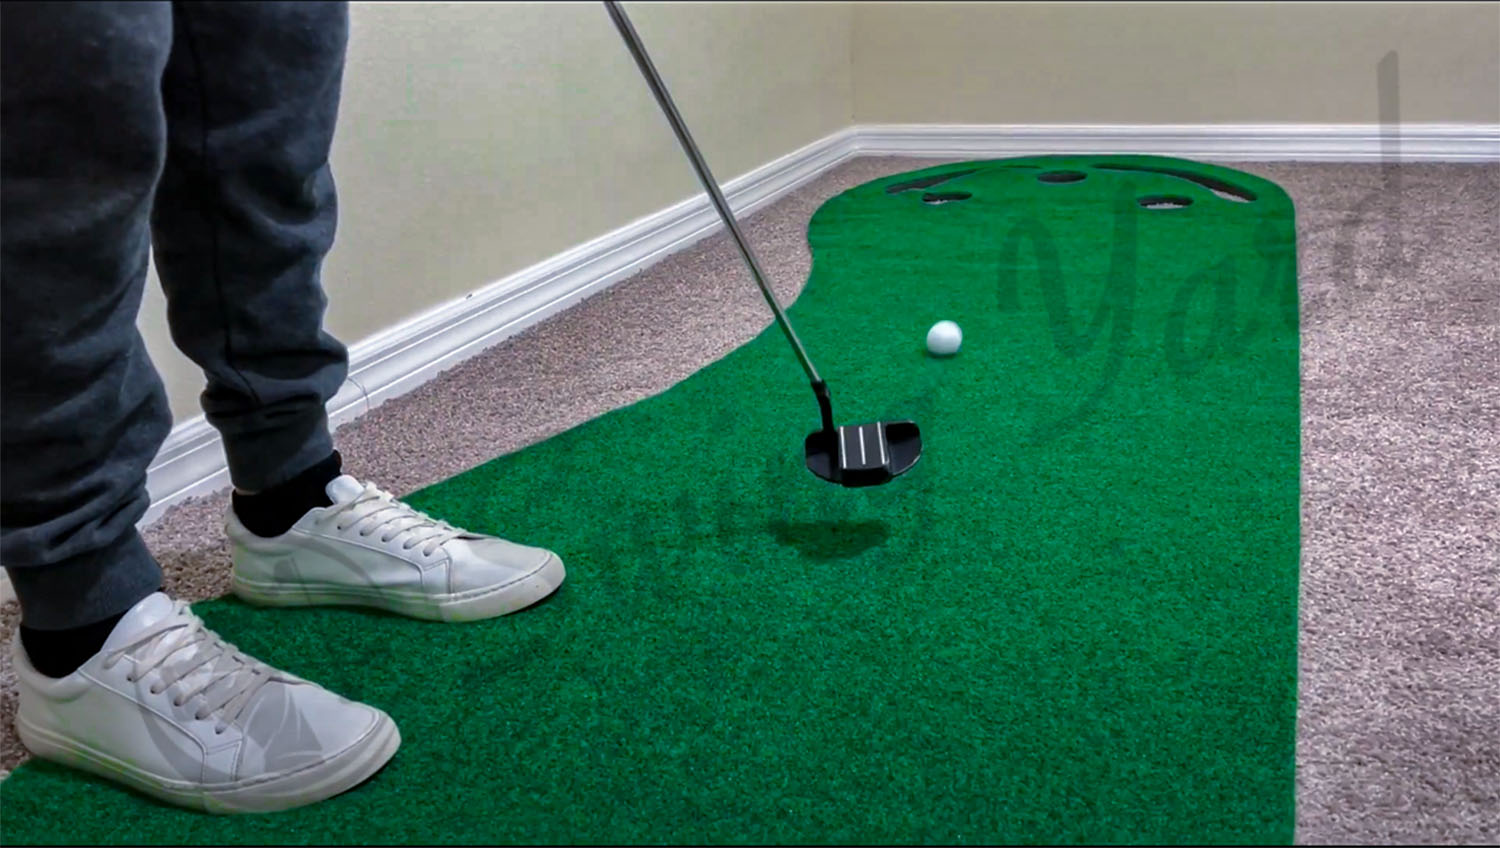 Testing out one of the best office putting sets